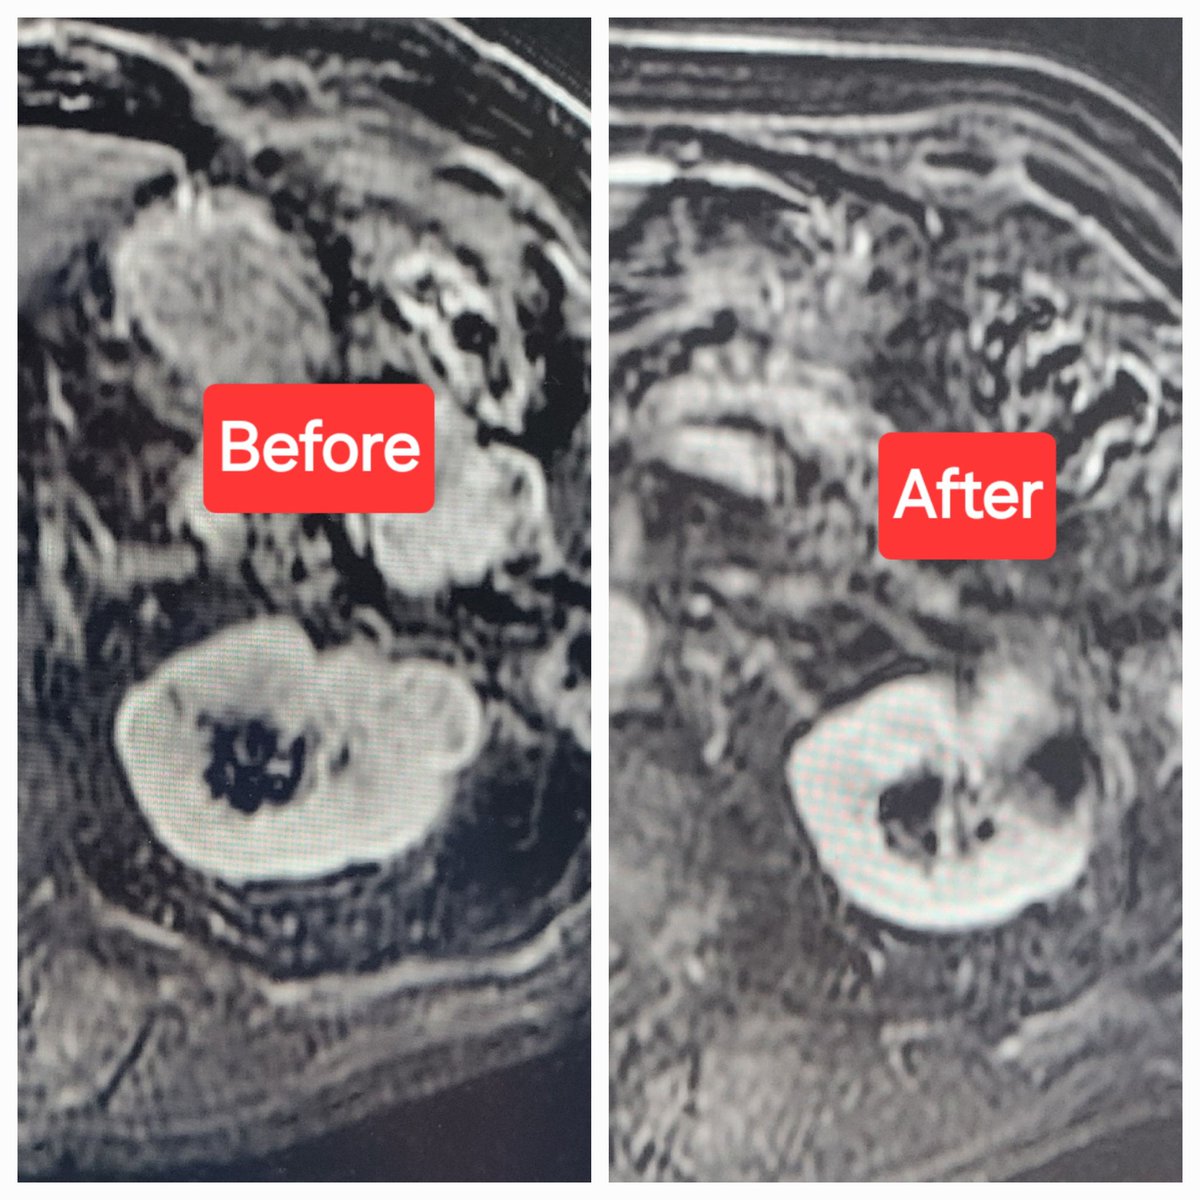 Patient with renal mass close to colon. Hydrodissection performed by injecting dilute contrast in between. Cryoablation performed safely with great coverage of mass but away from colon. FU MRI shows no viable mass. Nice work @joepanaro Dr. Kasper @templeradres @SIRRFS @SIR_ECS